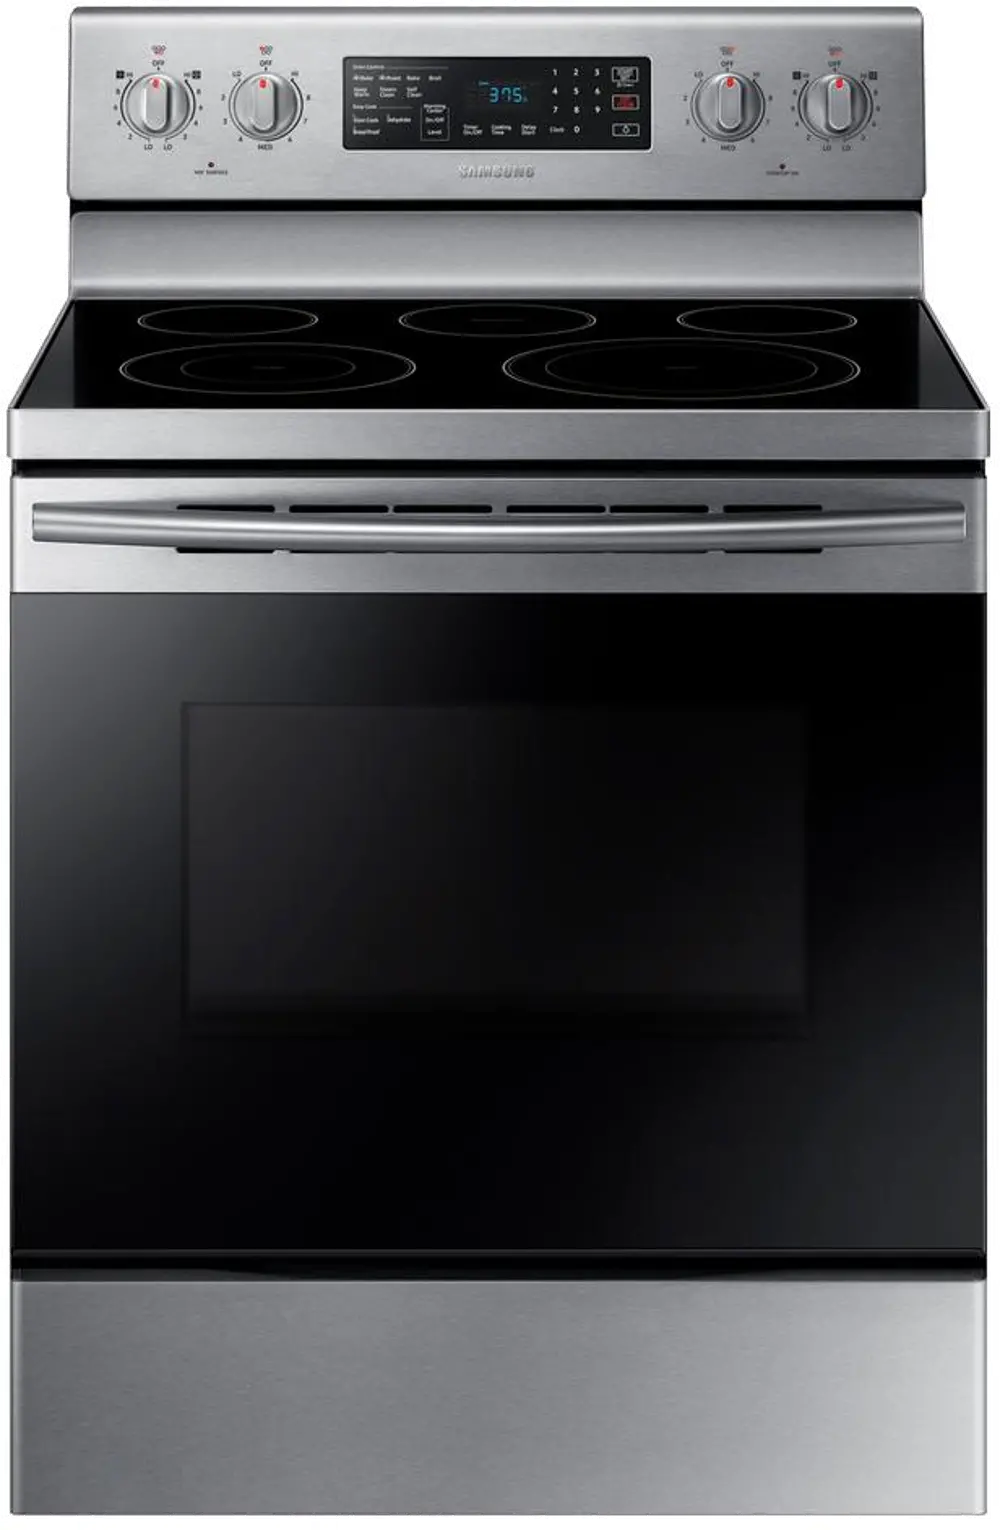 NE59M4320SS Samsung Electric Range with Dual Power Elements - 5.9 cu. ft. Stainless Steel-1